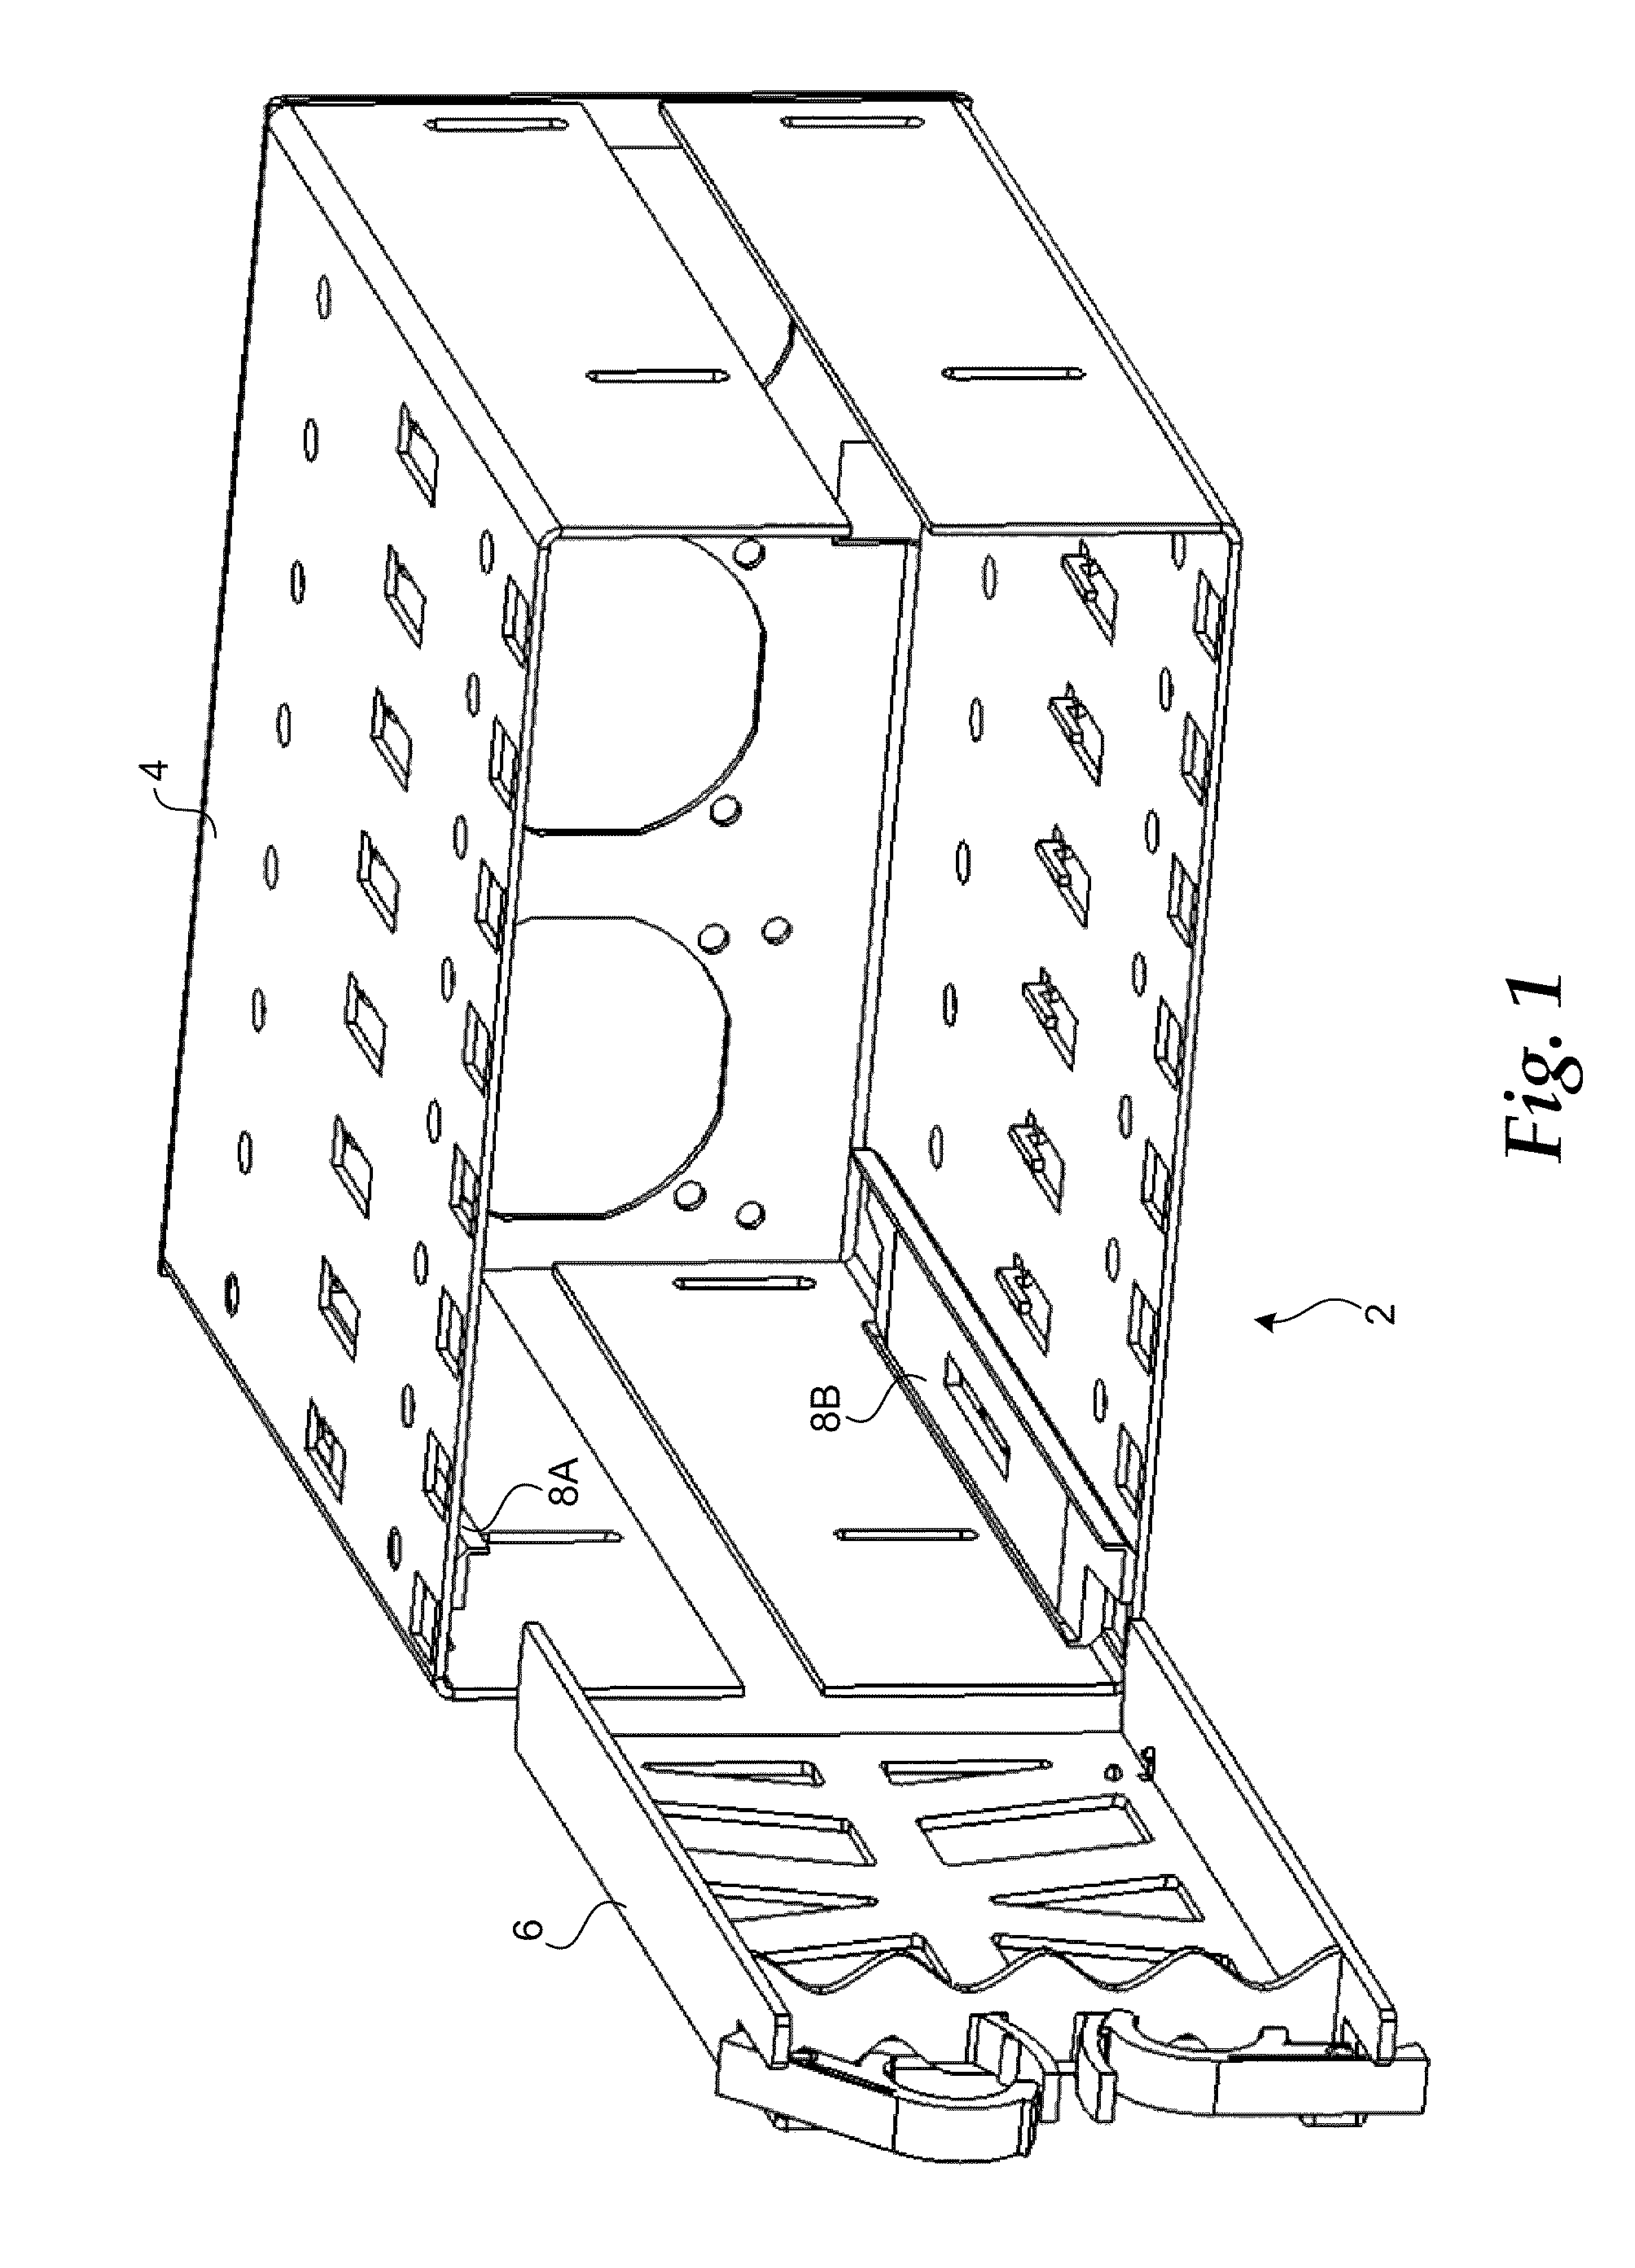 System and apparatus for removably mounting hard disk drives